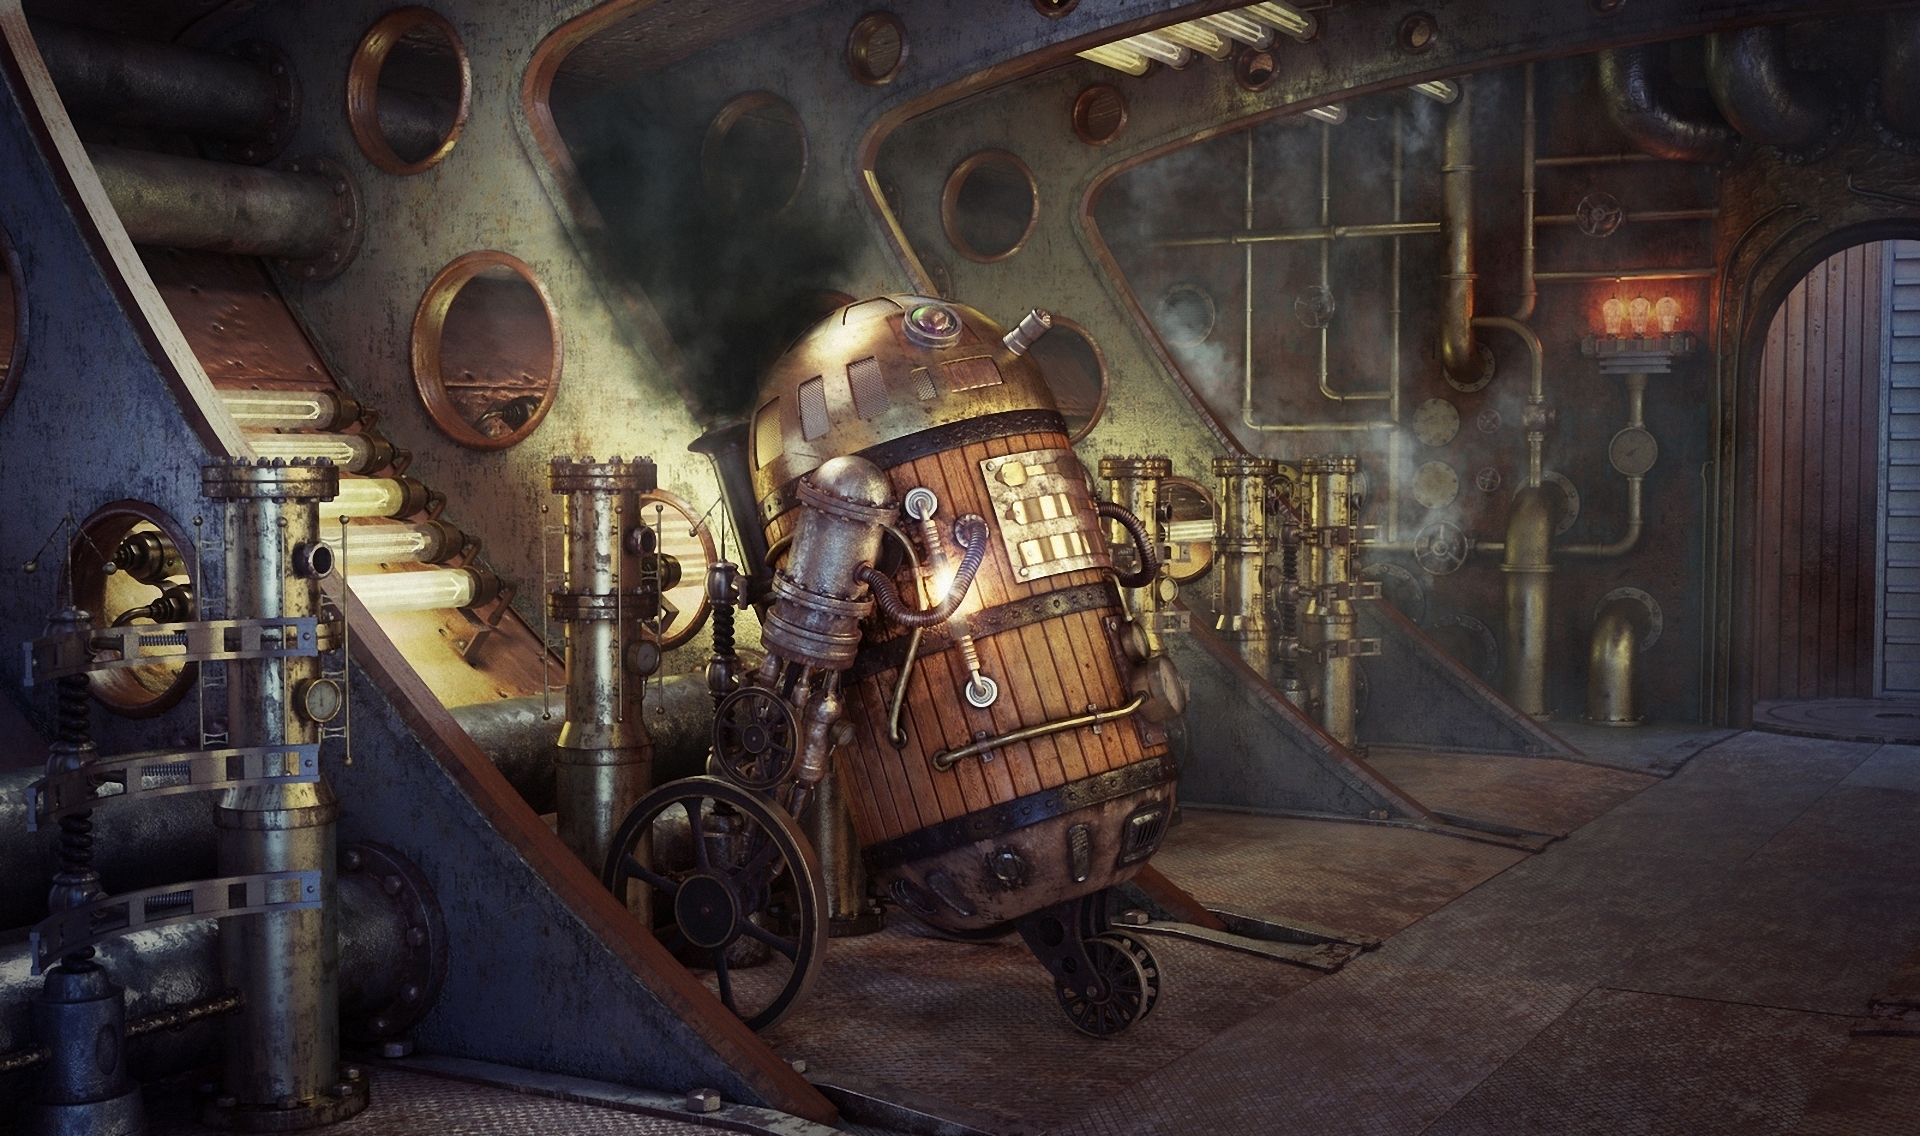 Art Star Wars Steampunk Robot R2d2 Smoke Pipes Movies Futuristic Wallpapers Hd Desktop And Mobile Backgrounds